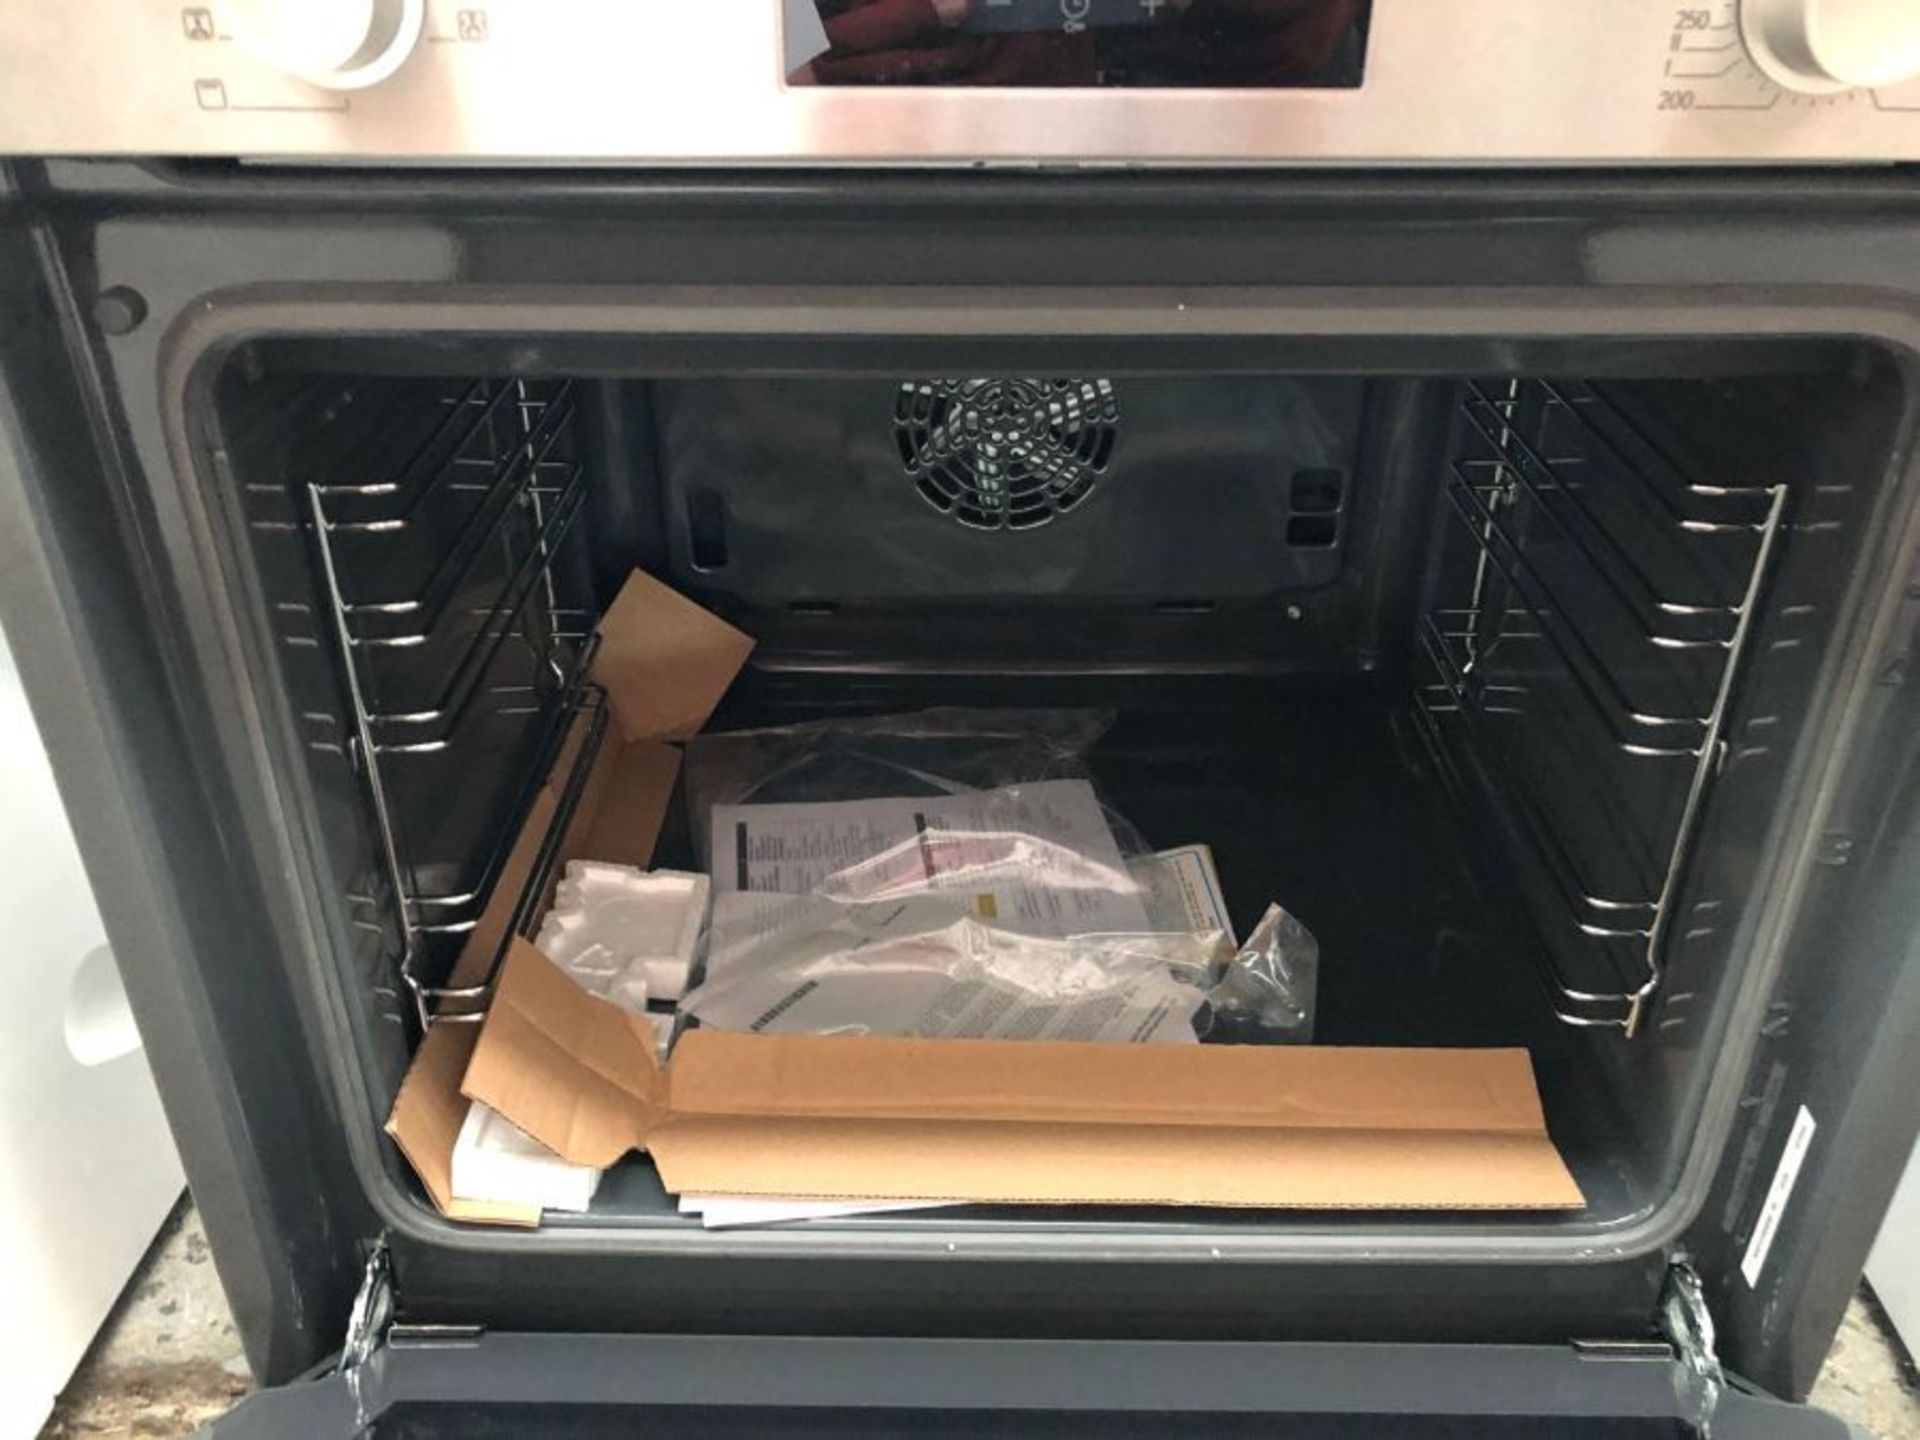 BOSCH SERIE 2 HHF113BR0B BUILT-IN ELECTRIC SINGLE OVEN - Image 2 of 3